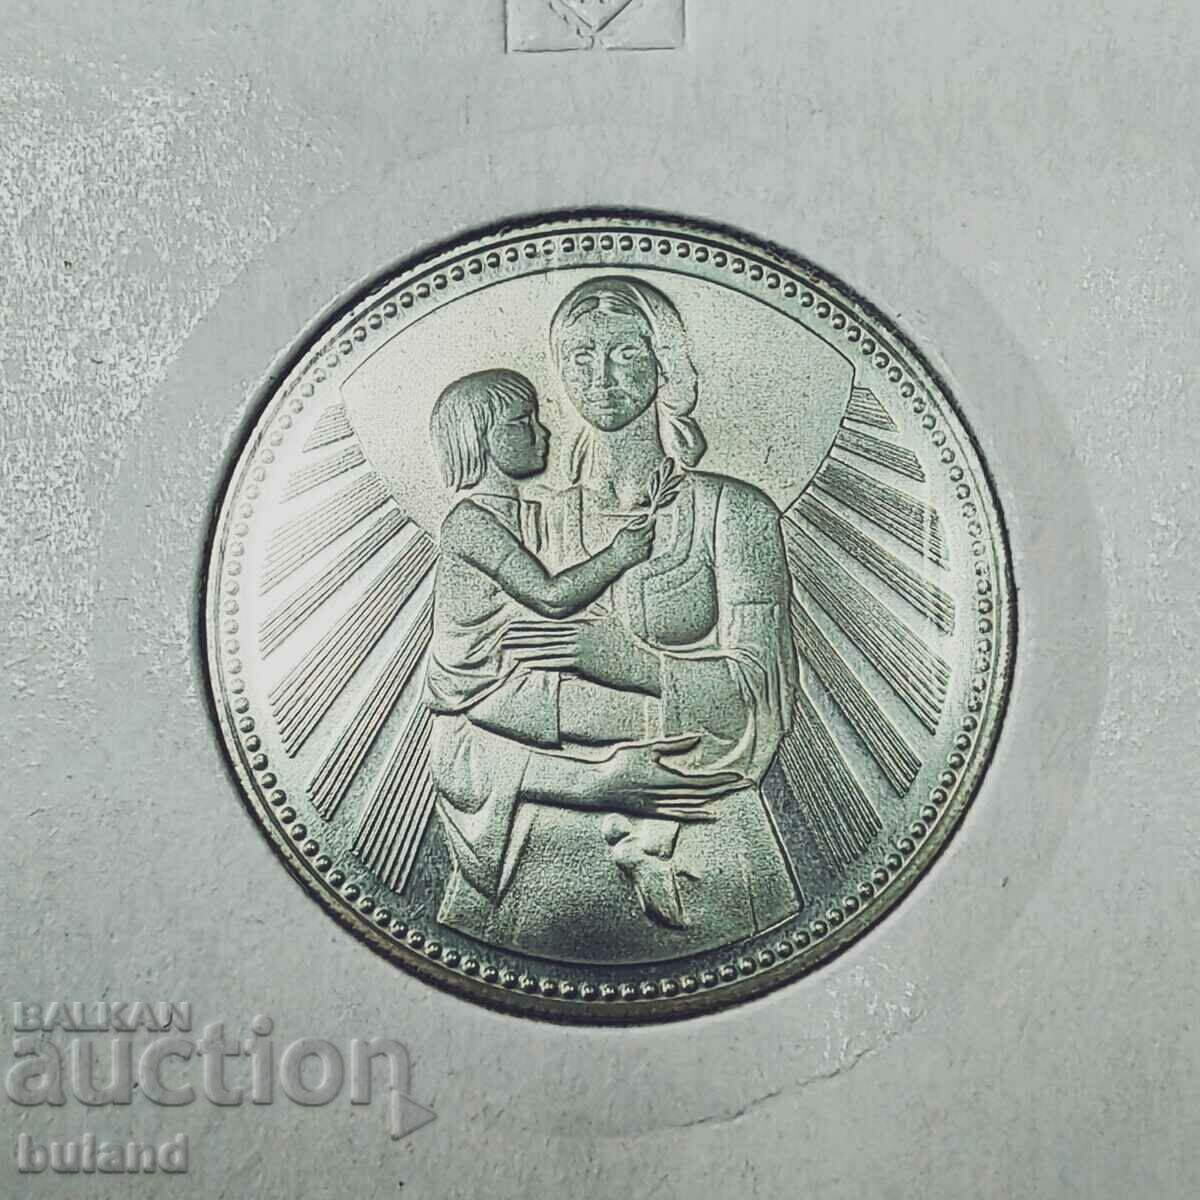 Bulgarian Jubilee Social Coin 2 Leva 1981 Mother with Child